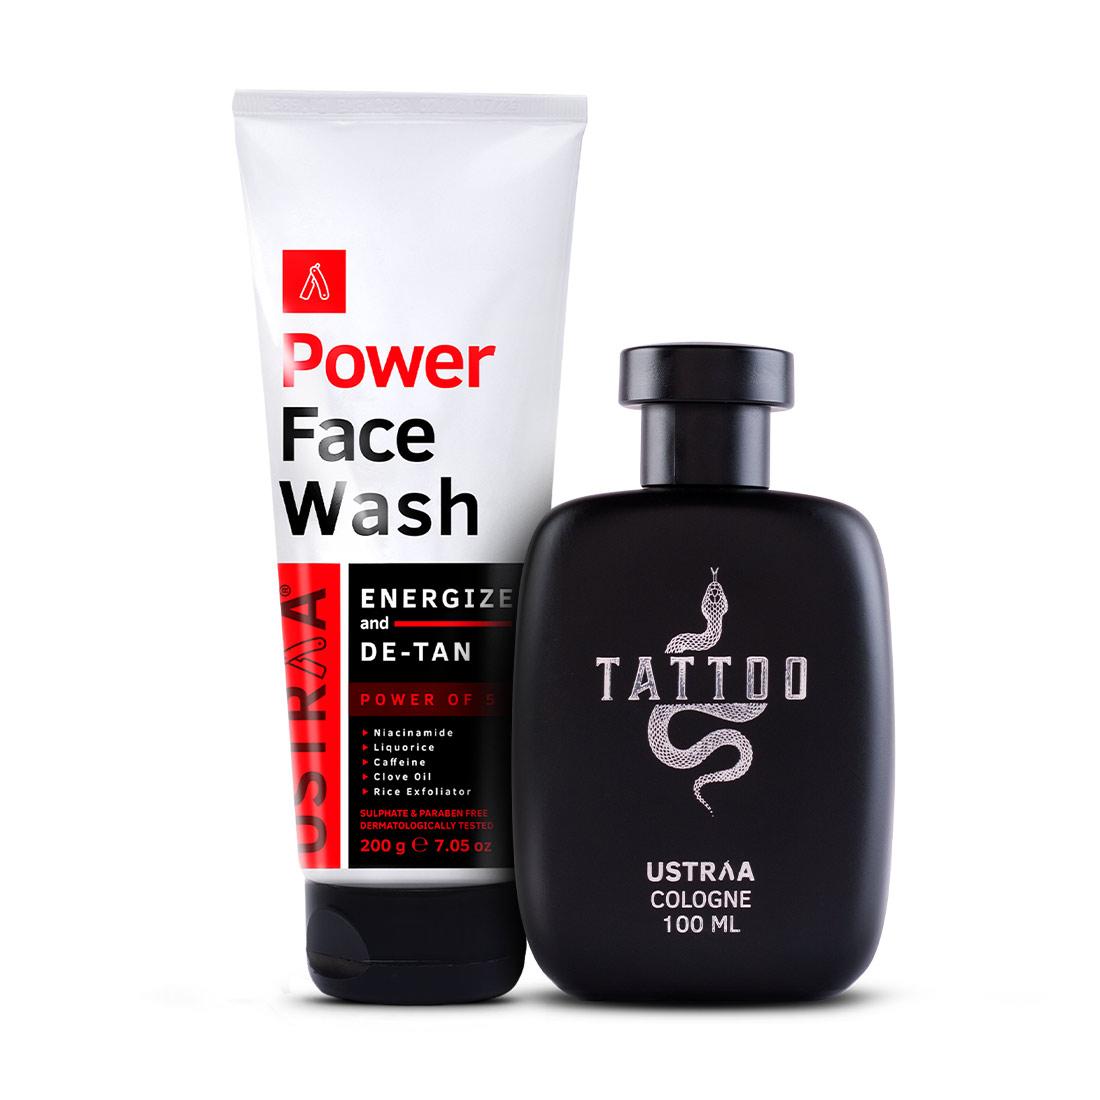 Power Face Wash Energize & Tattoo Cologne